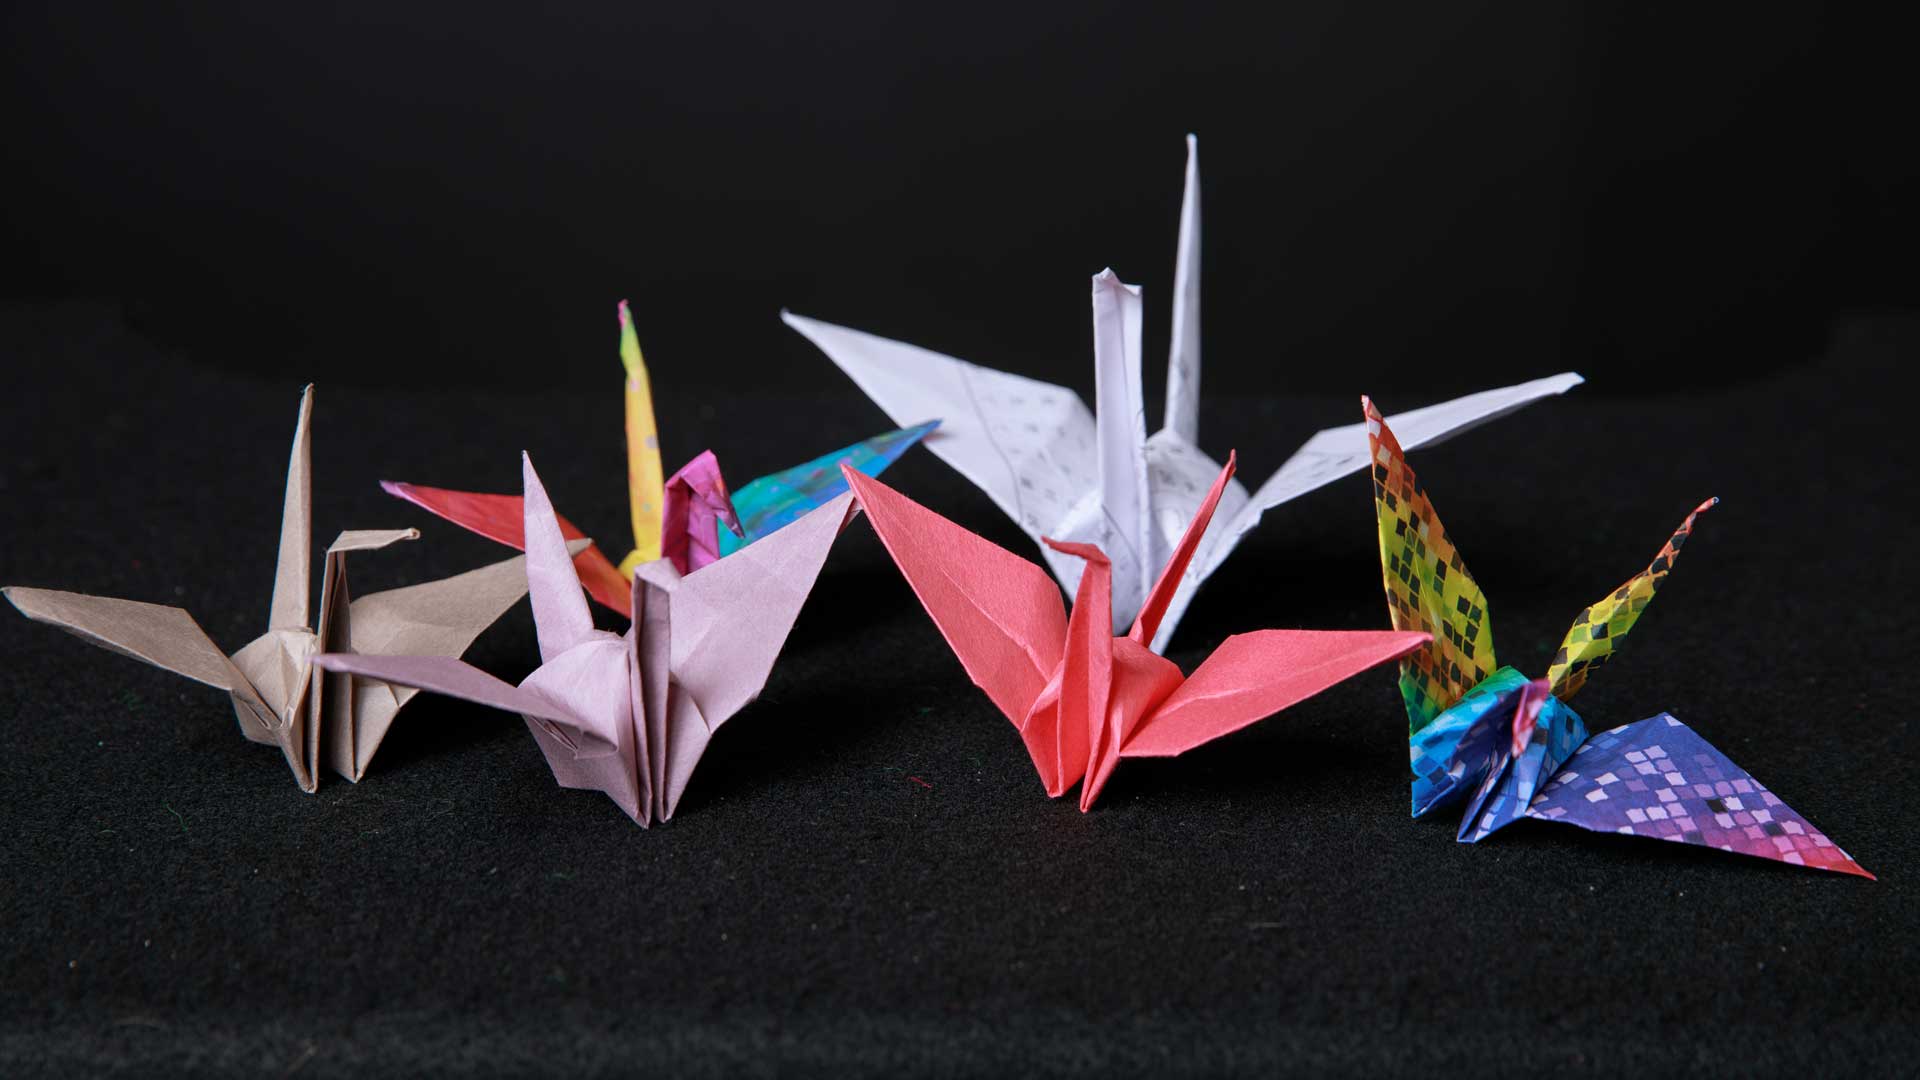 Six paper cranes are folded and sitting on a black background. One crane is coral pink, one is lavender, one is tan, two are multicolored and one is folded on Hiragana practice paper.